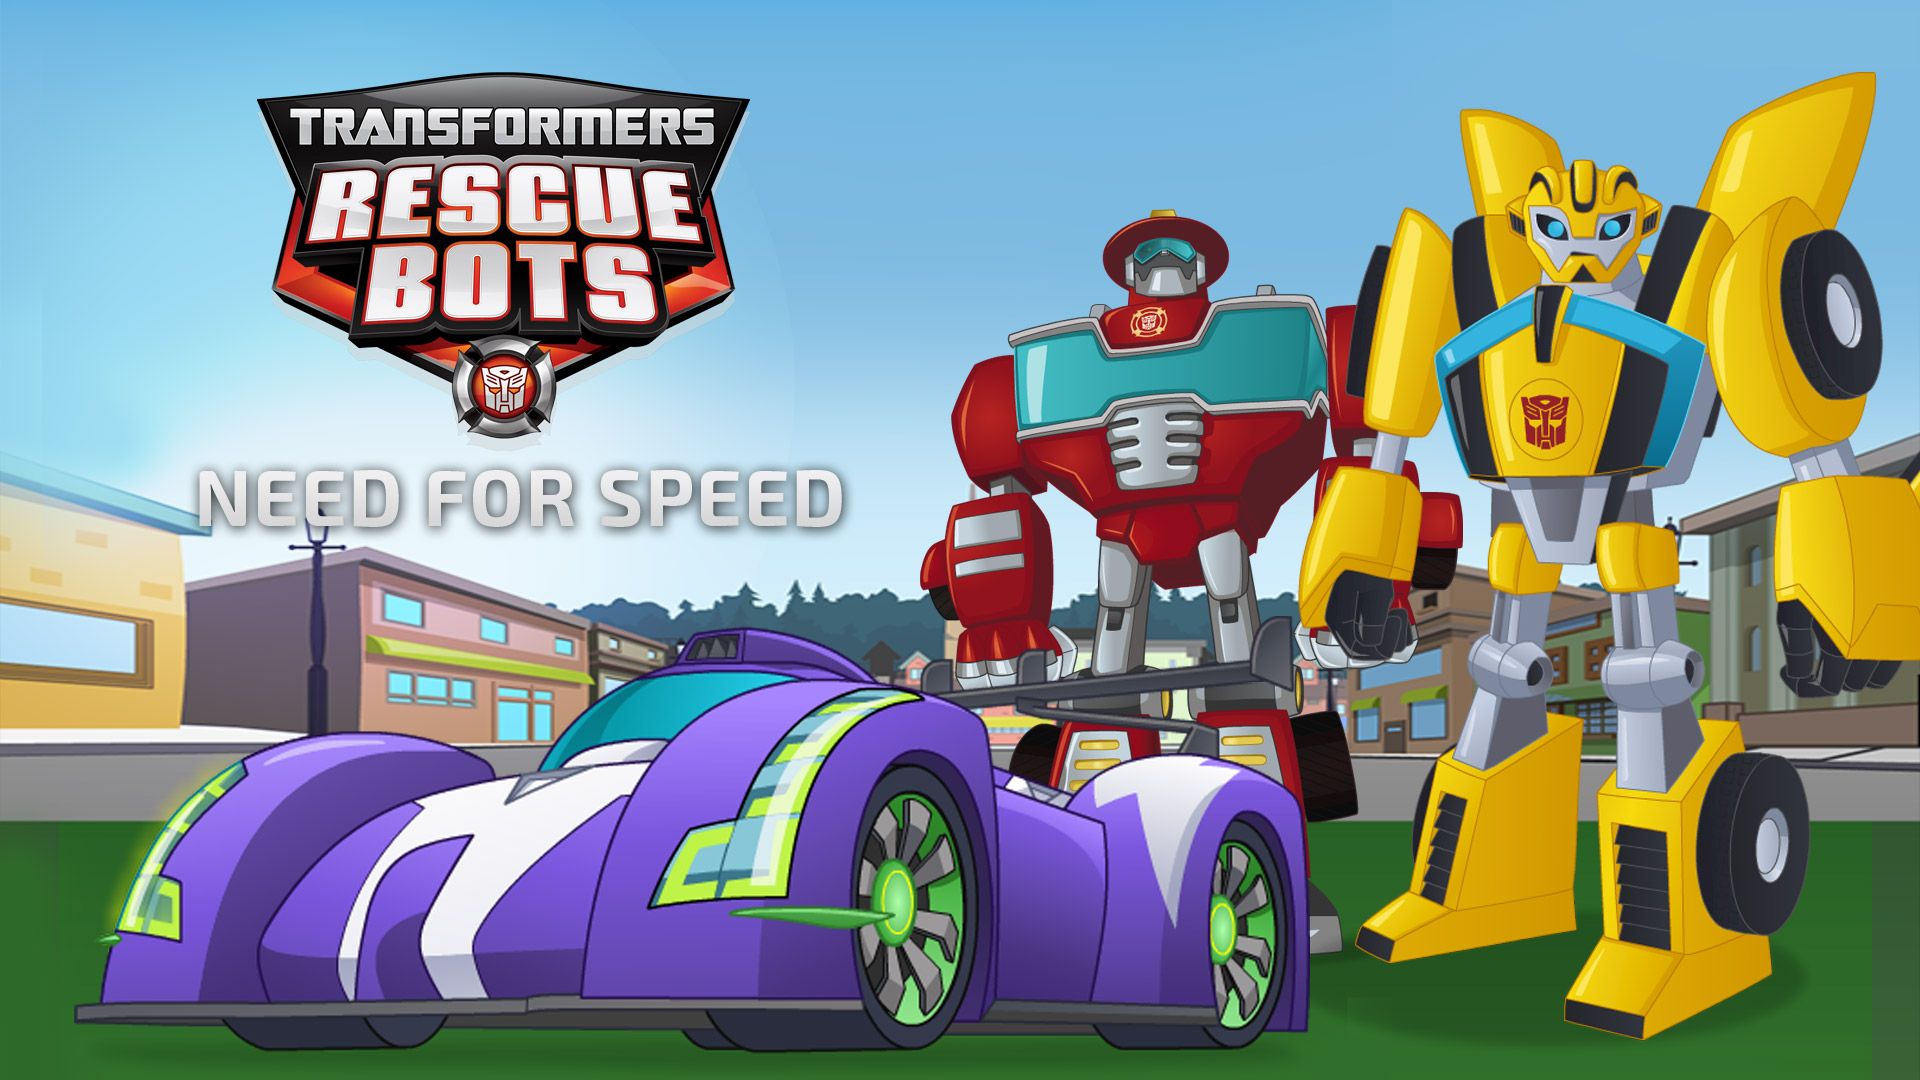 Transformers Rescue Bots: Need for Speed!